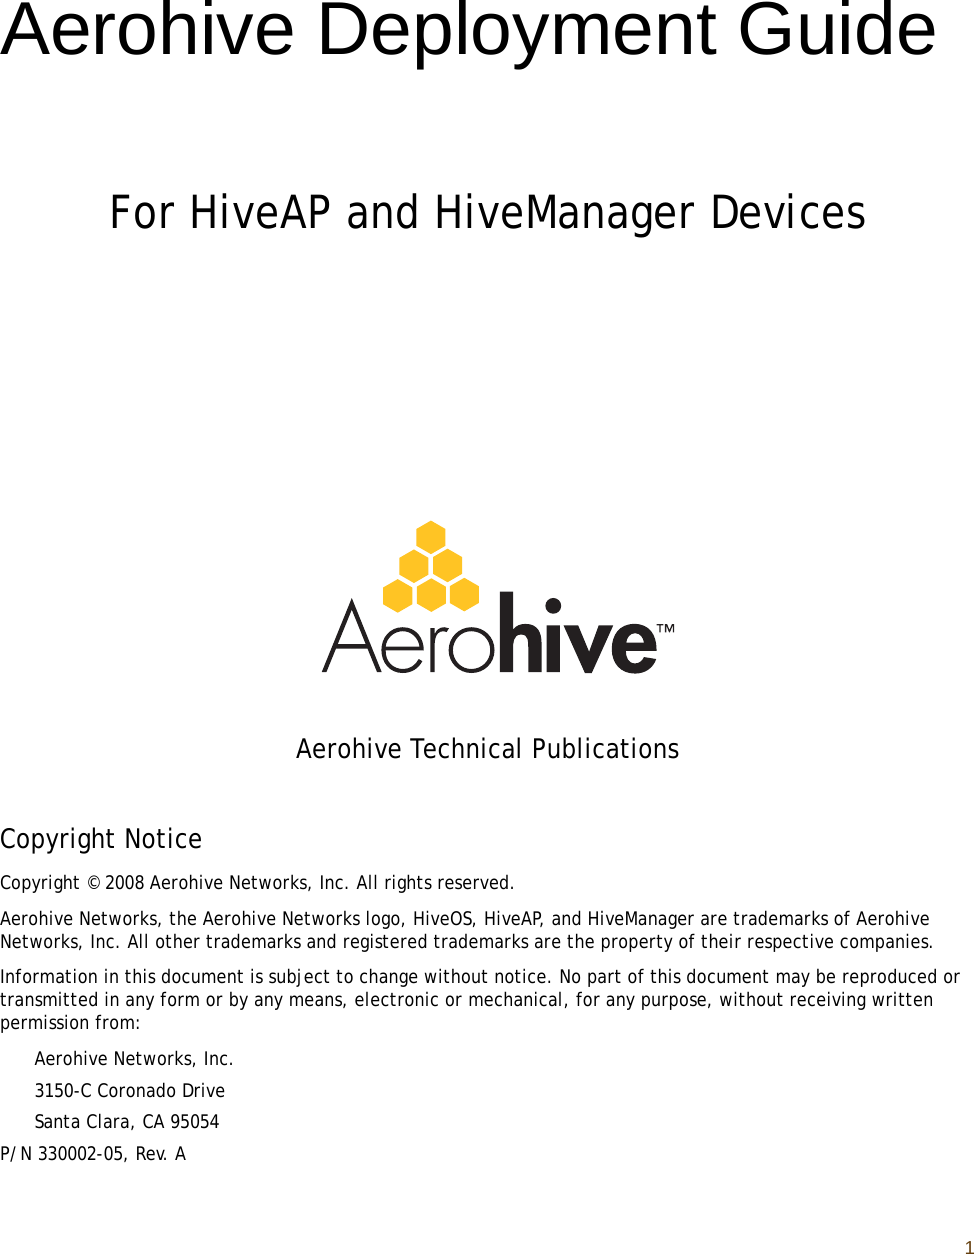 1Aerohive Deployment GuideFor HiveAP and HiveManager DevicesAerohive Technical PublicationsCopyright NoticeCopyright © 2008 Aerohive Networks, Inc. All rights reserved.Aerohive Networks, the Aerohive Networks logo, HiveOS, HiveAP, and HiveManager are trademarks of Aerohive Networks, Inc. All other trademarks and registered trademarks are the property of their respective companies.Information in this document is subject to change without notice. No part of this document may be reproduced or transmitted in any form or by any means, electronic or mechanical, for any purpose, without receiving written permission from:Aerohive Networks, Inc.3150-C Coronado DriveSanta Clara, CA 95054P/N 330002-05, Rev. A